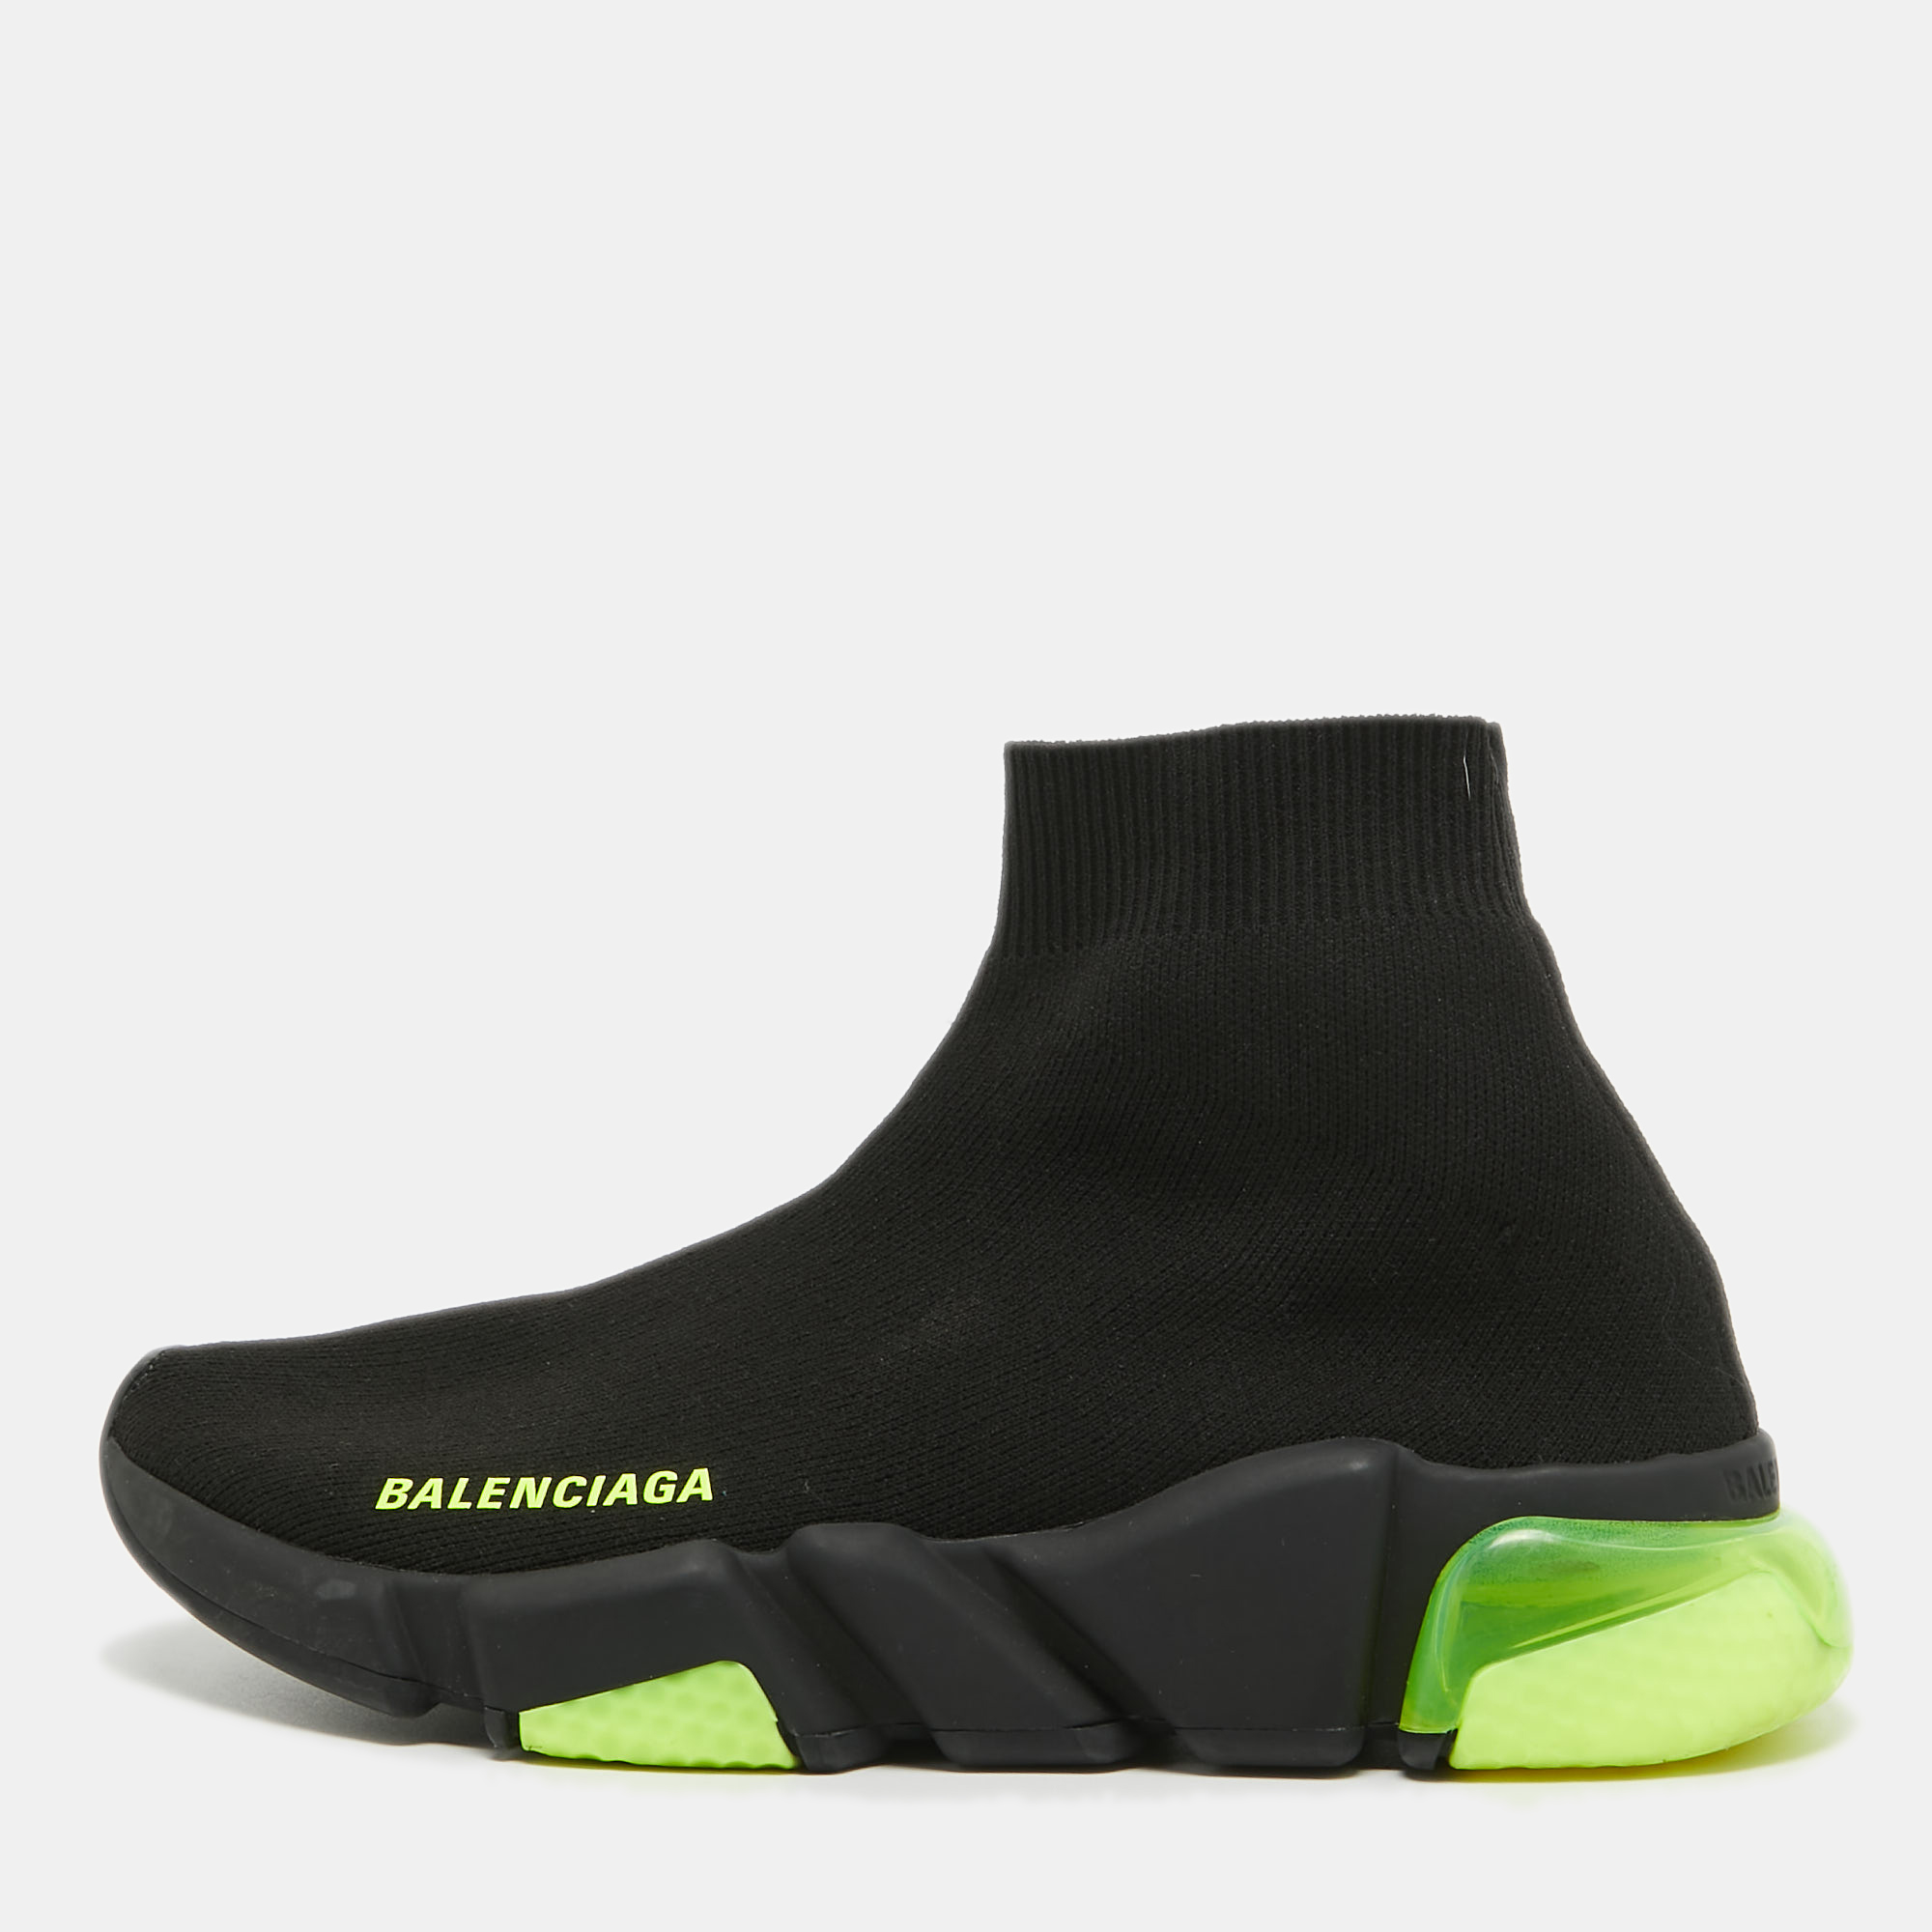 Celebrating the fusion of sports and luxury fashion these Balenciaga Speed Trainer sneakers are absolutely worth the splurge. They are laceless and so well crafted with logo accented knit fabric in a sock style. The sneakers are also designed with shock absorption and memory soles to assist you at every step. Fully equipped to give you the best experience this style filled pair deserves to be yours.